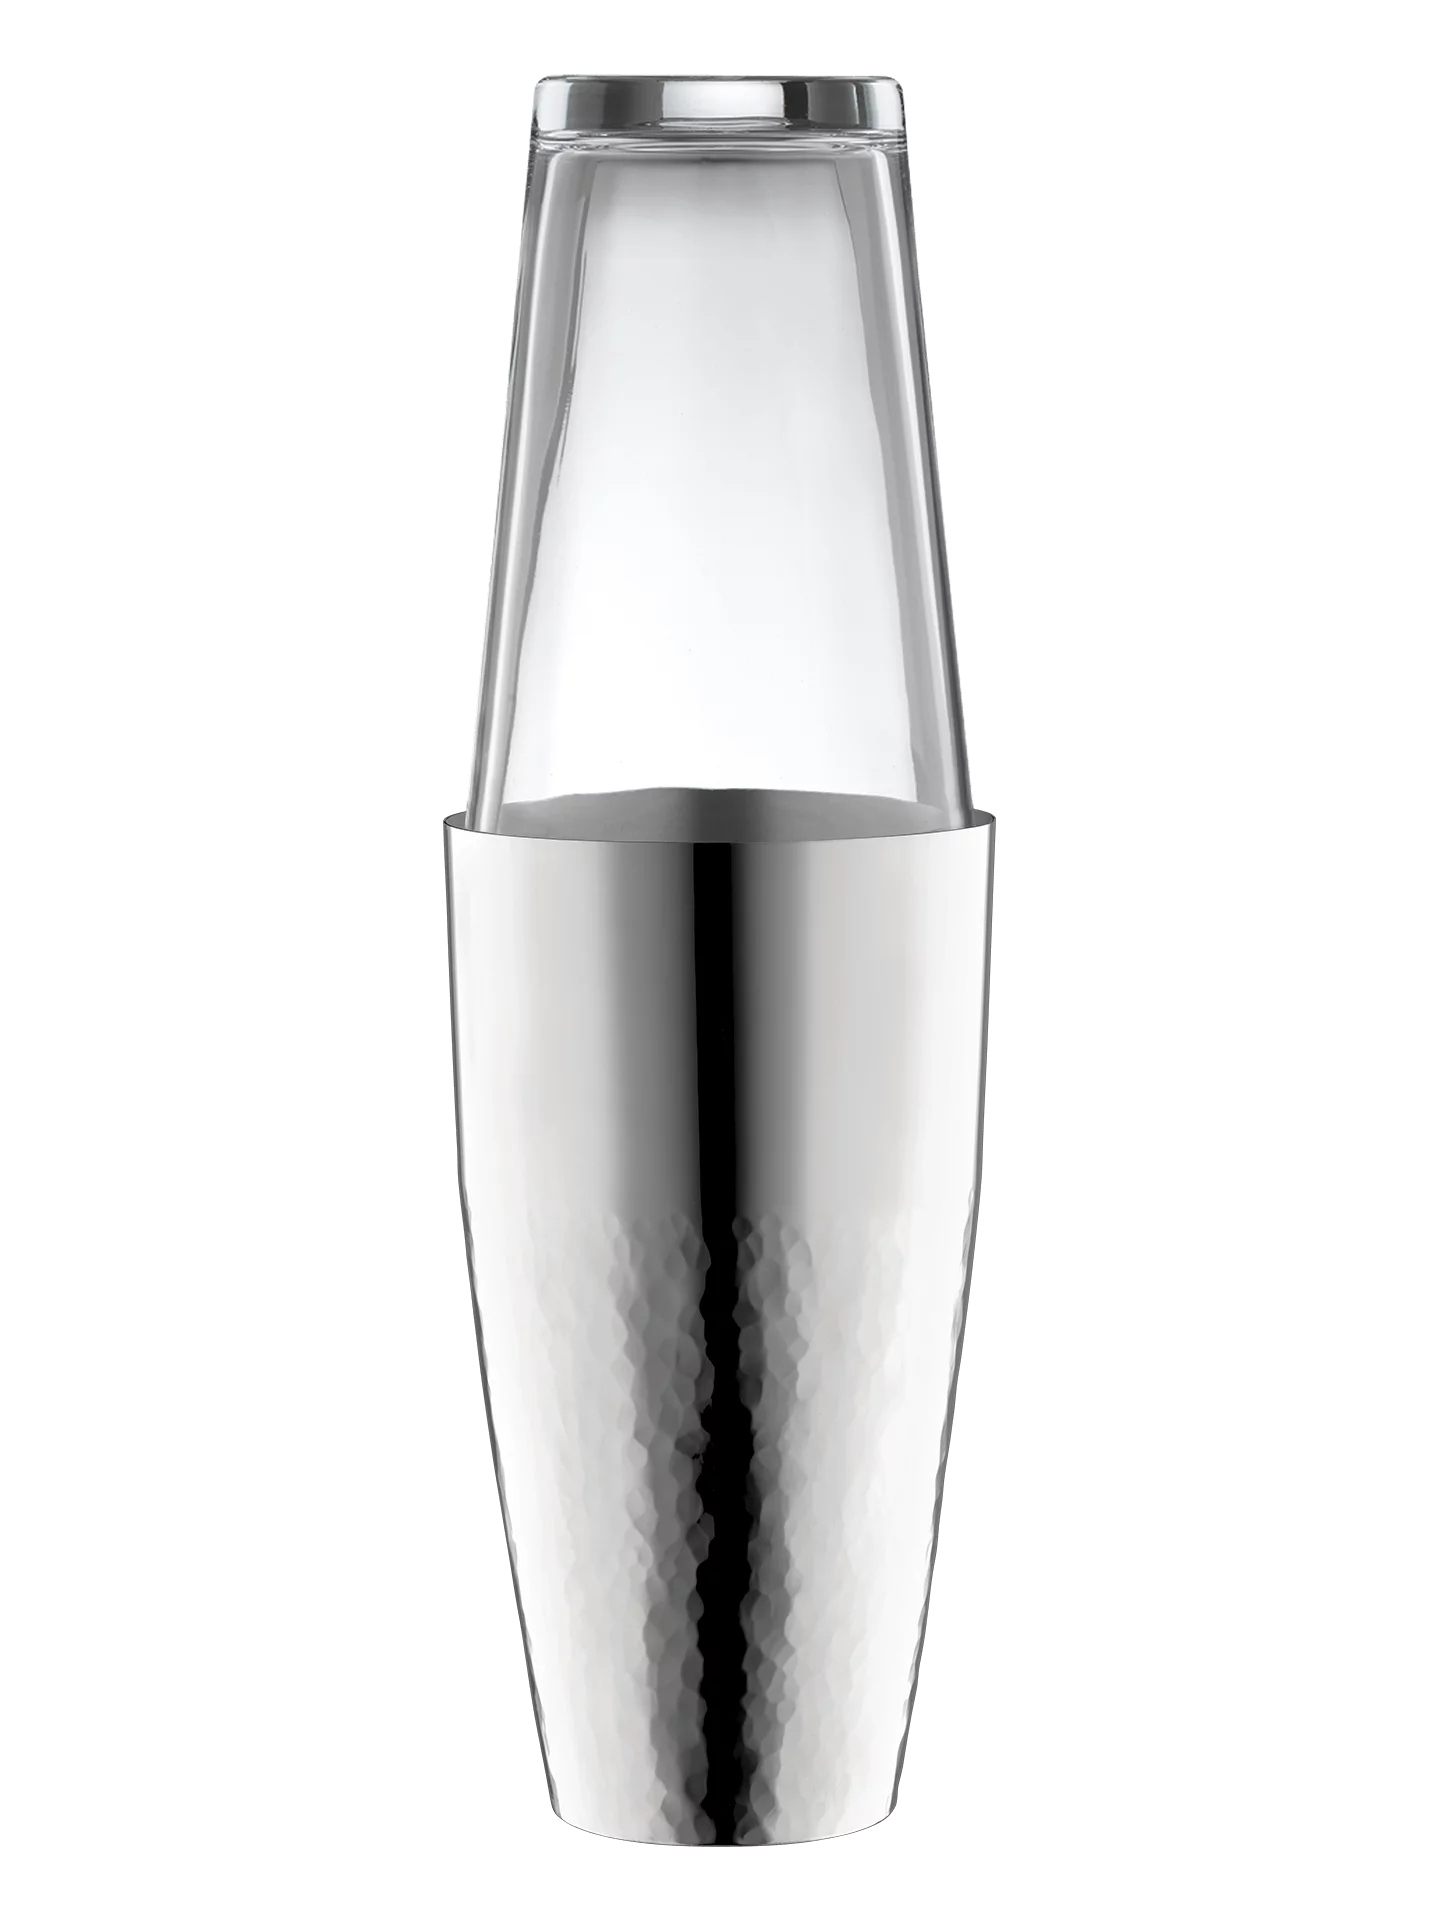 Martelé Cocktail shaker with glass (90g silverplated)